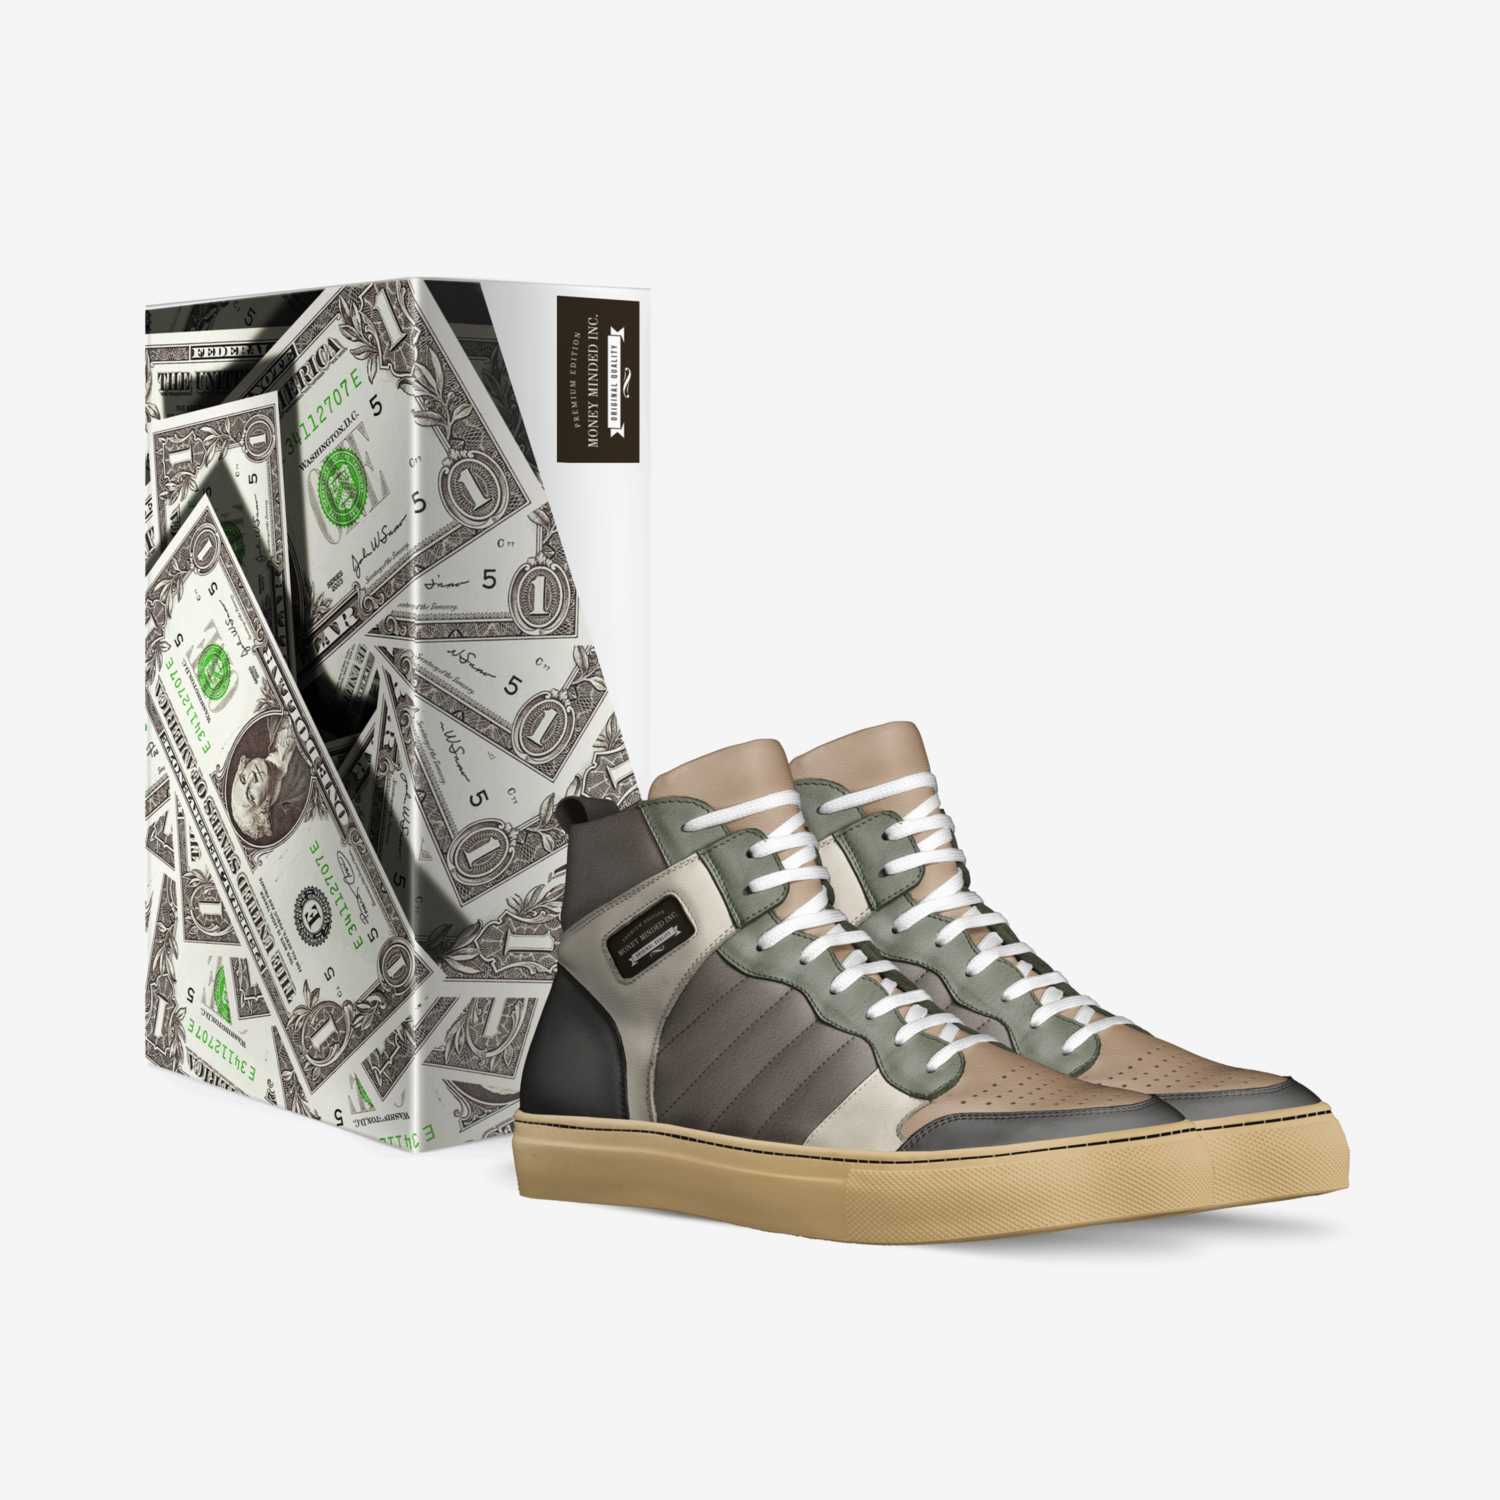 MMI Money Made custom made in Italy shoes by Michael Rugley | Box view